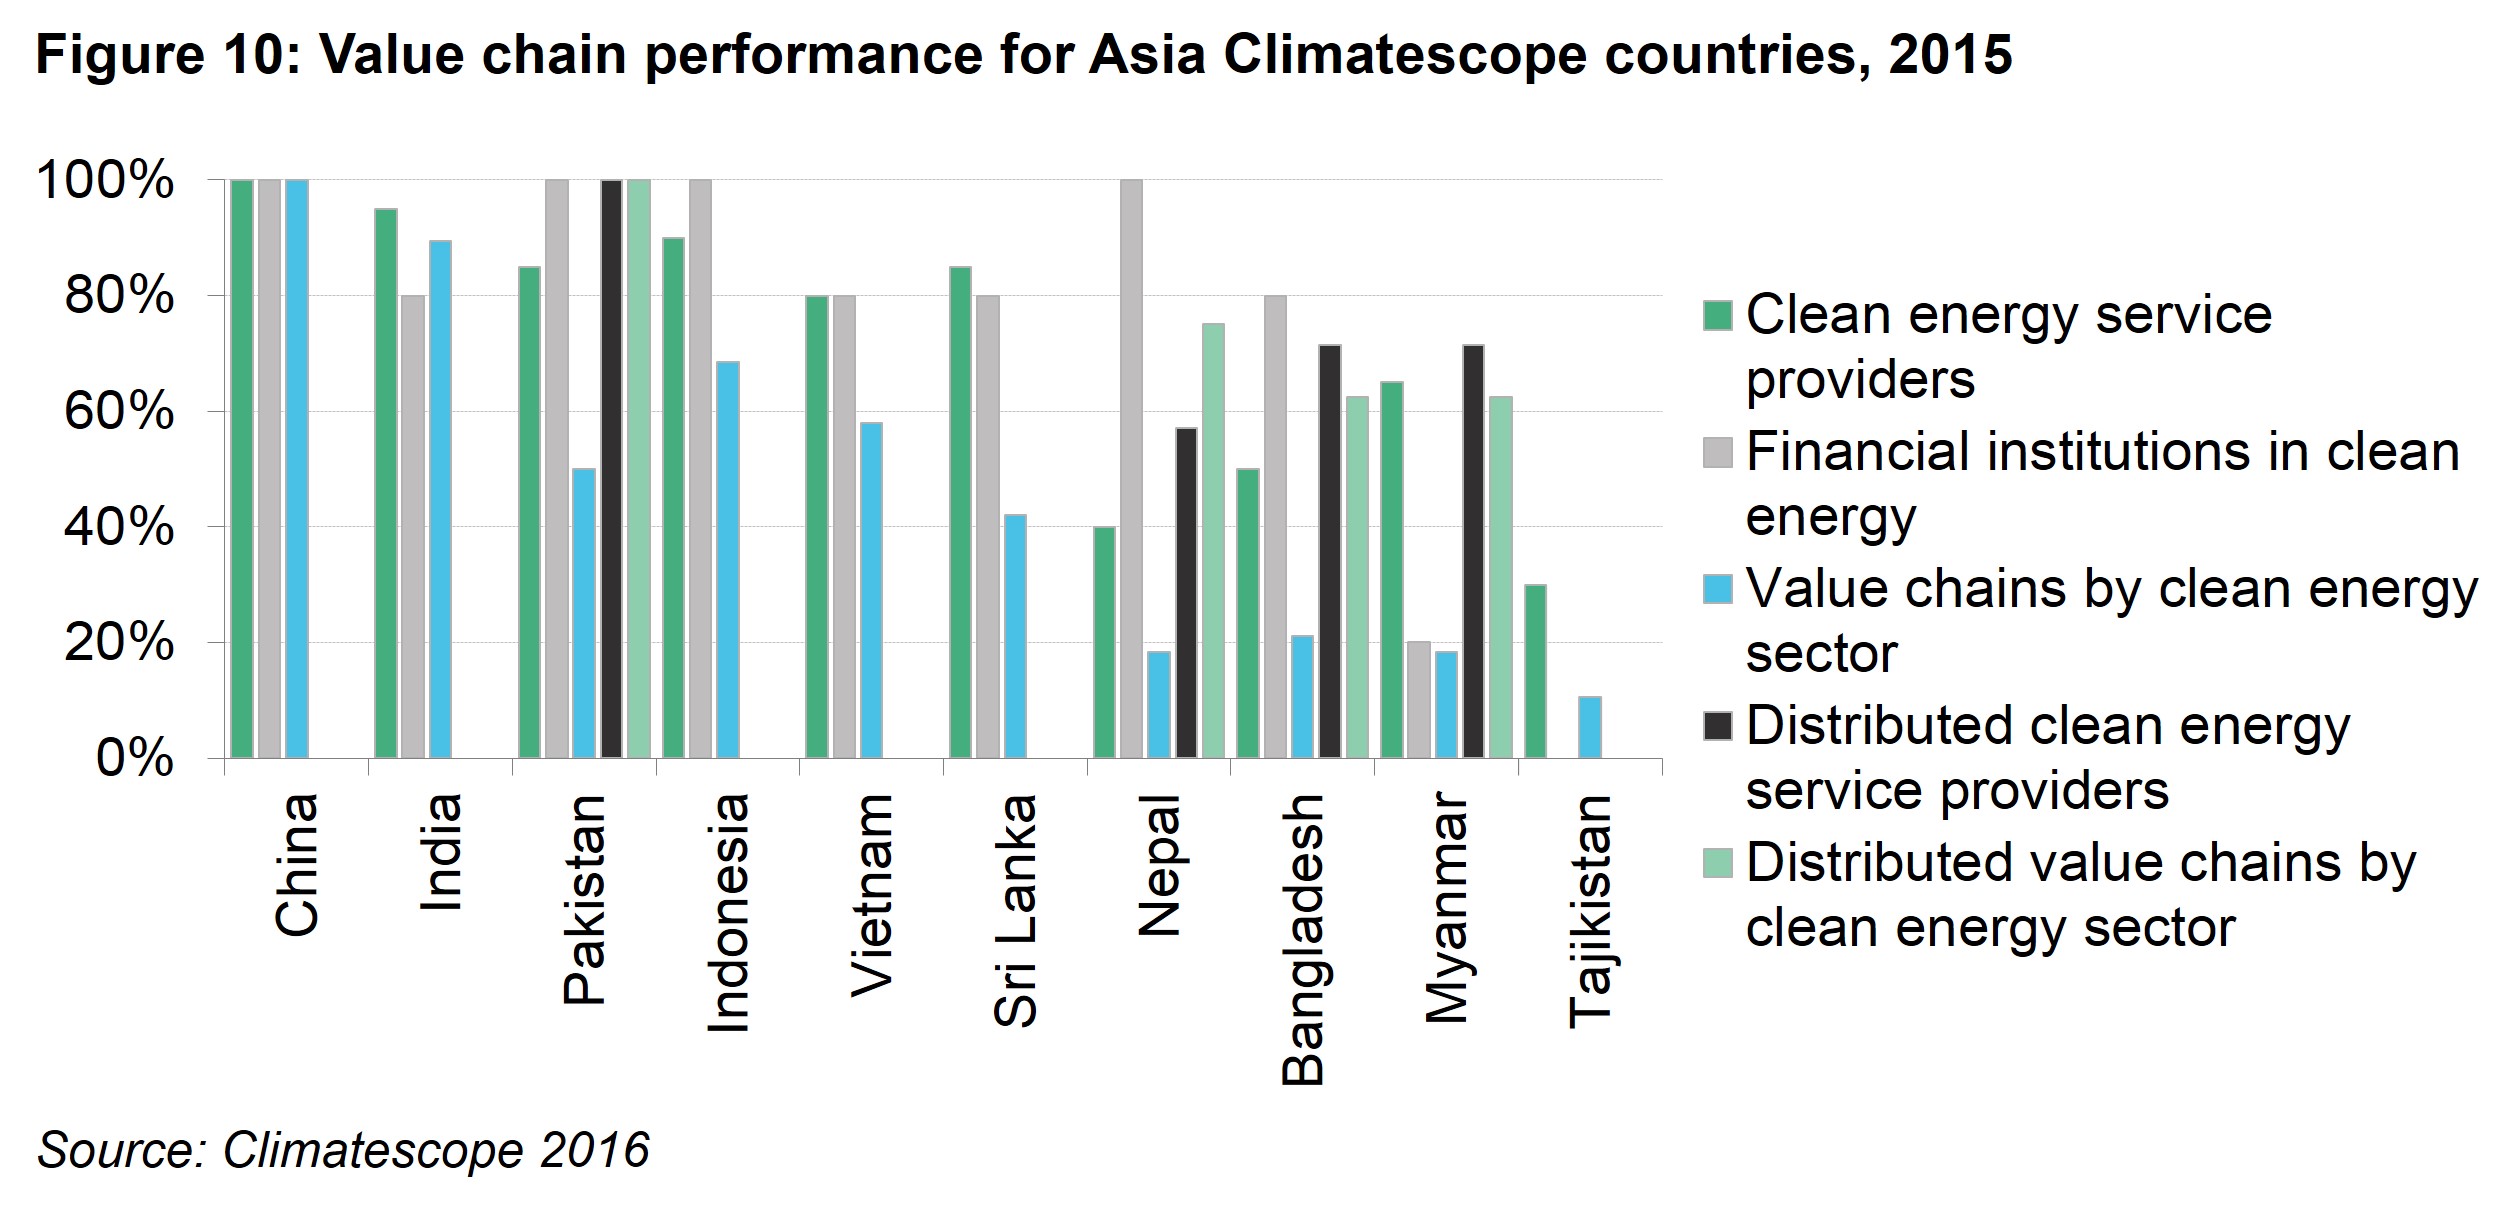 Asia Fig 10 - Value chain performance for Asia Climatescope countries, 2015